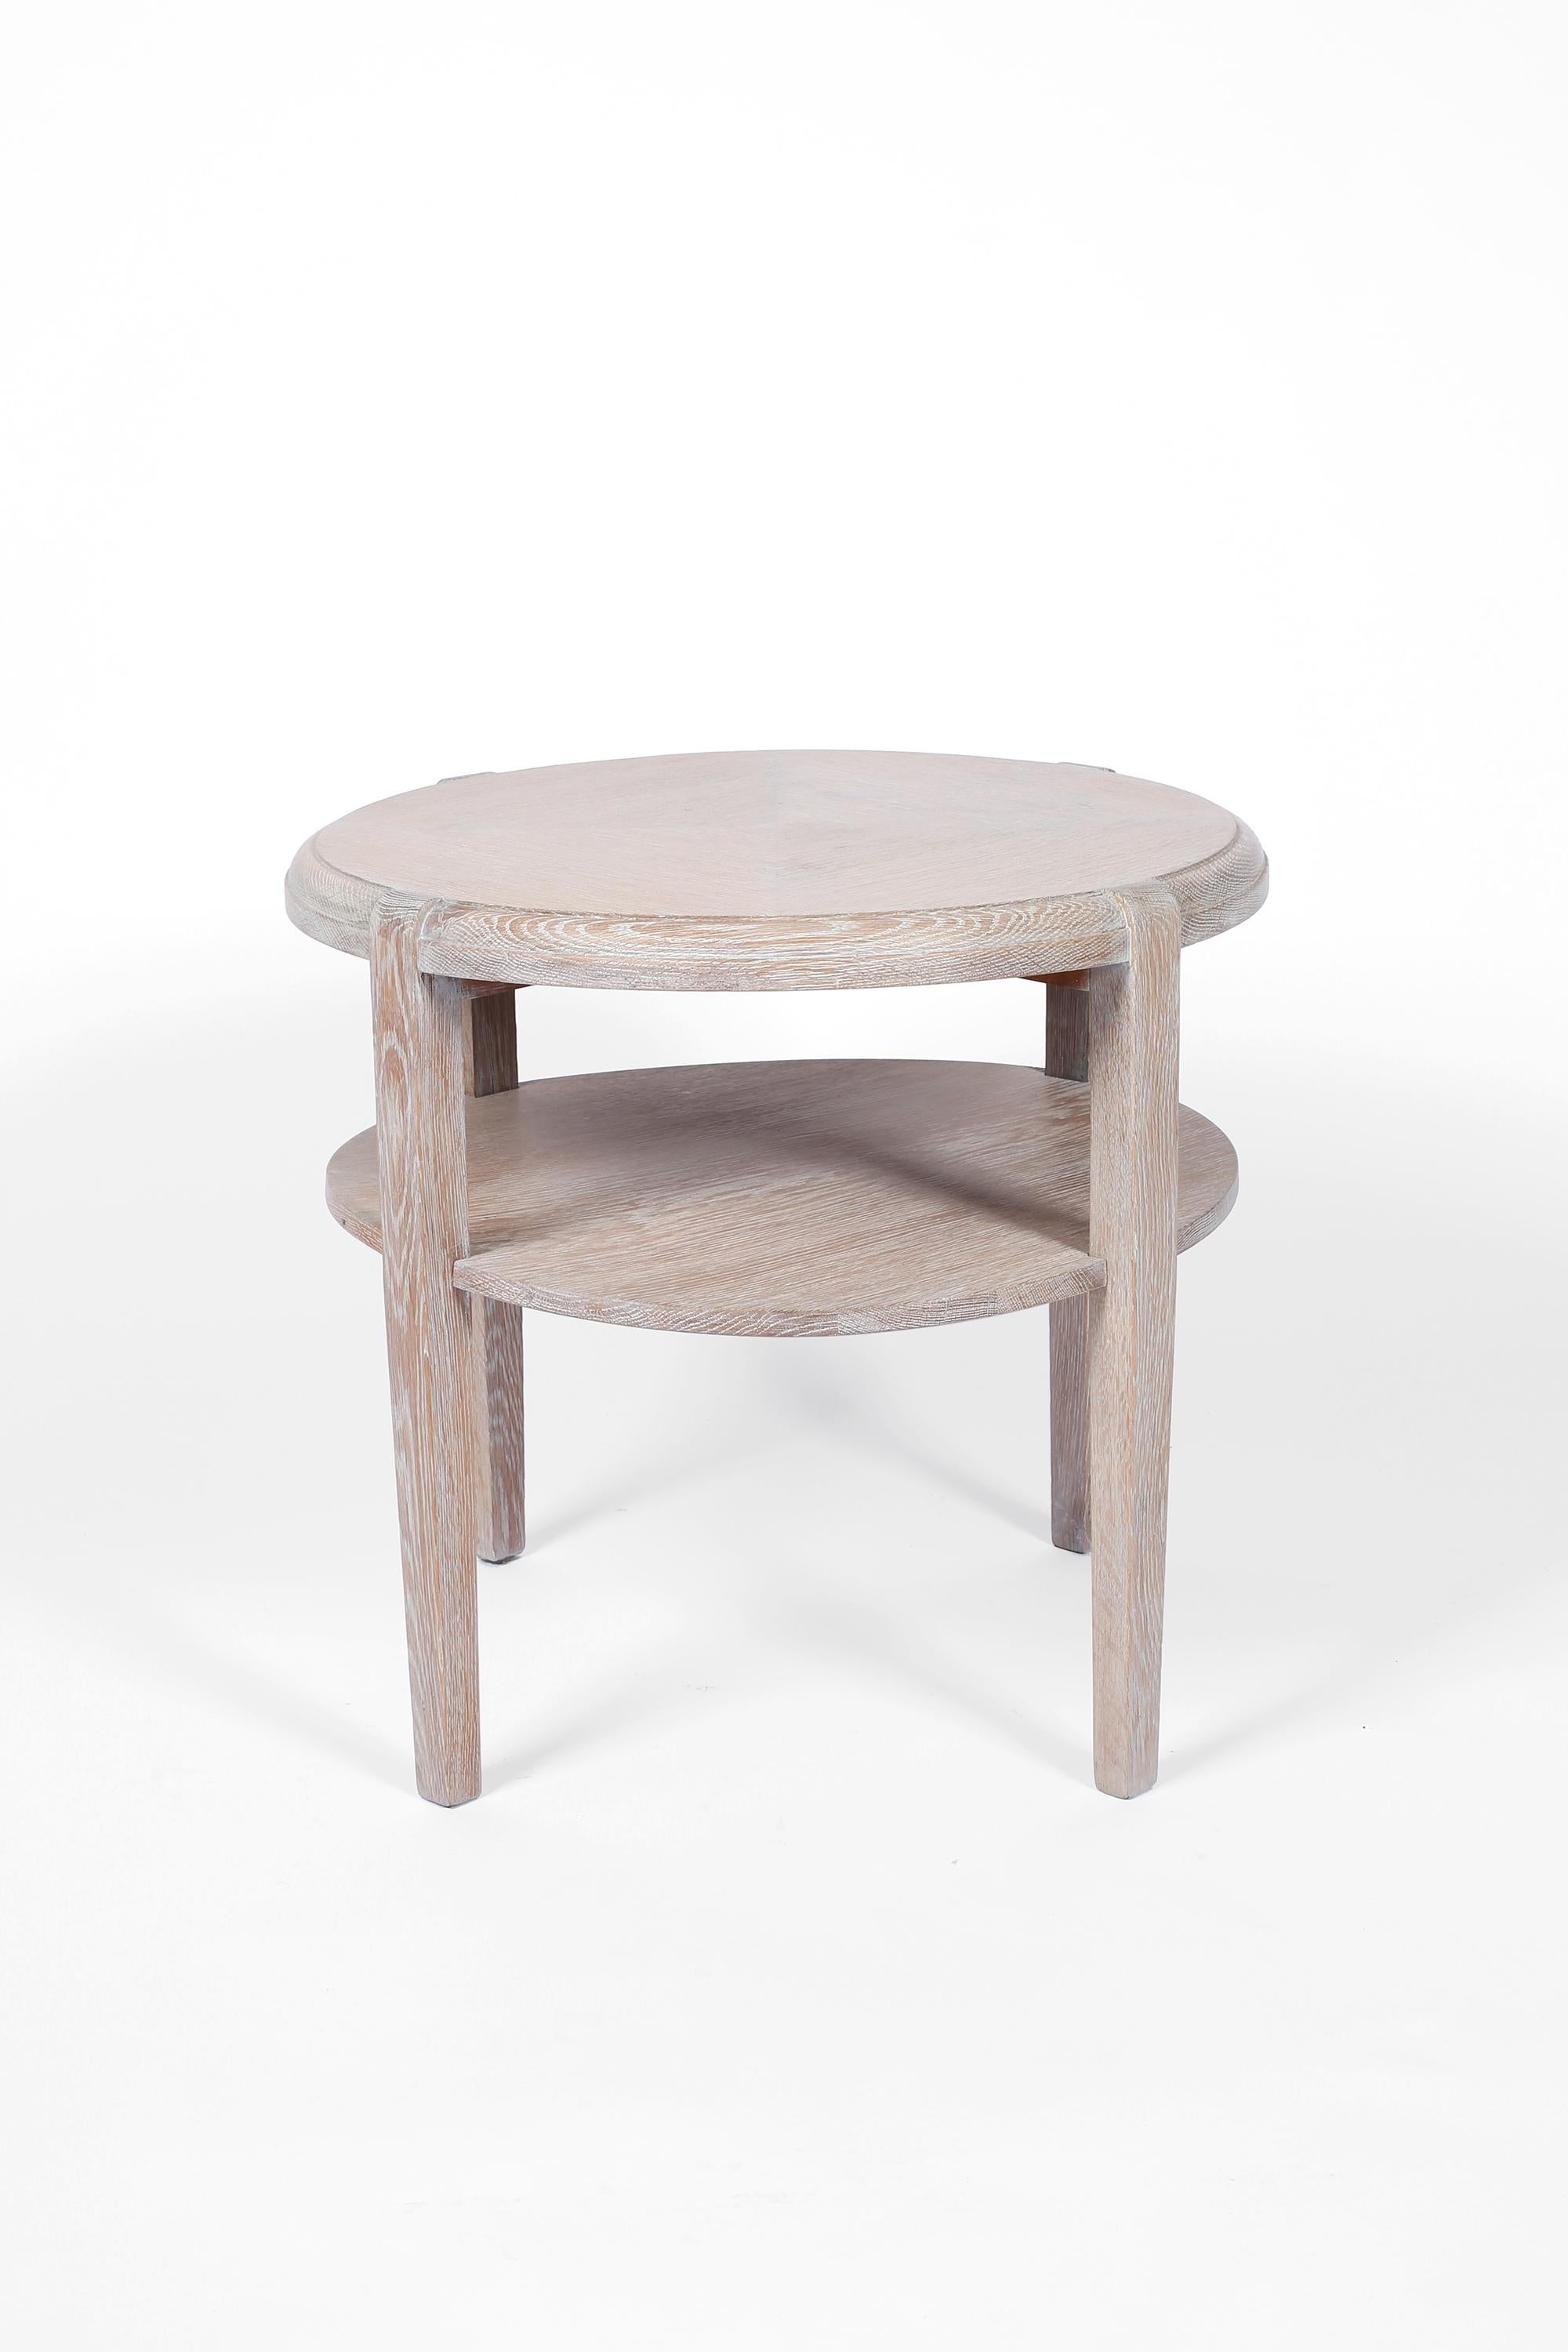 A limed oak two tier circular side table in the manner of Jean-Michel Frank. Constructed from solid oak timber with a decorative veneered top and subtly tapering legs. French, circa  1940s.